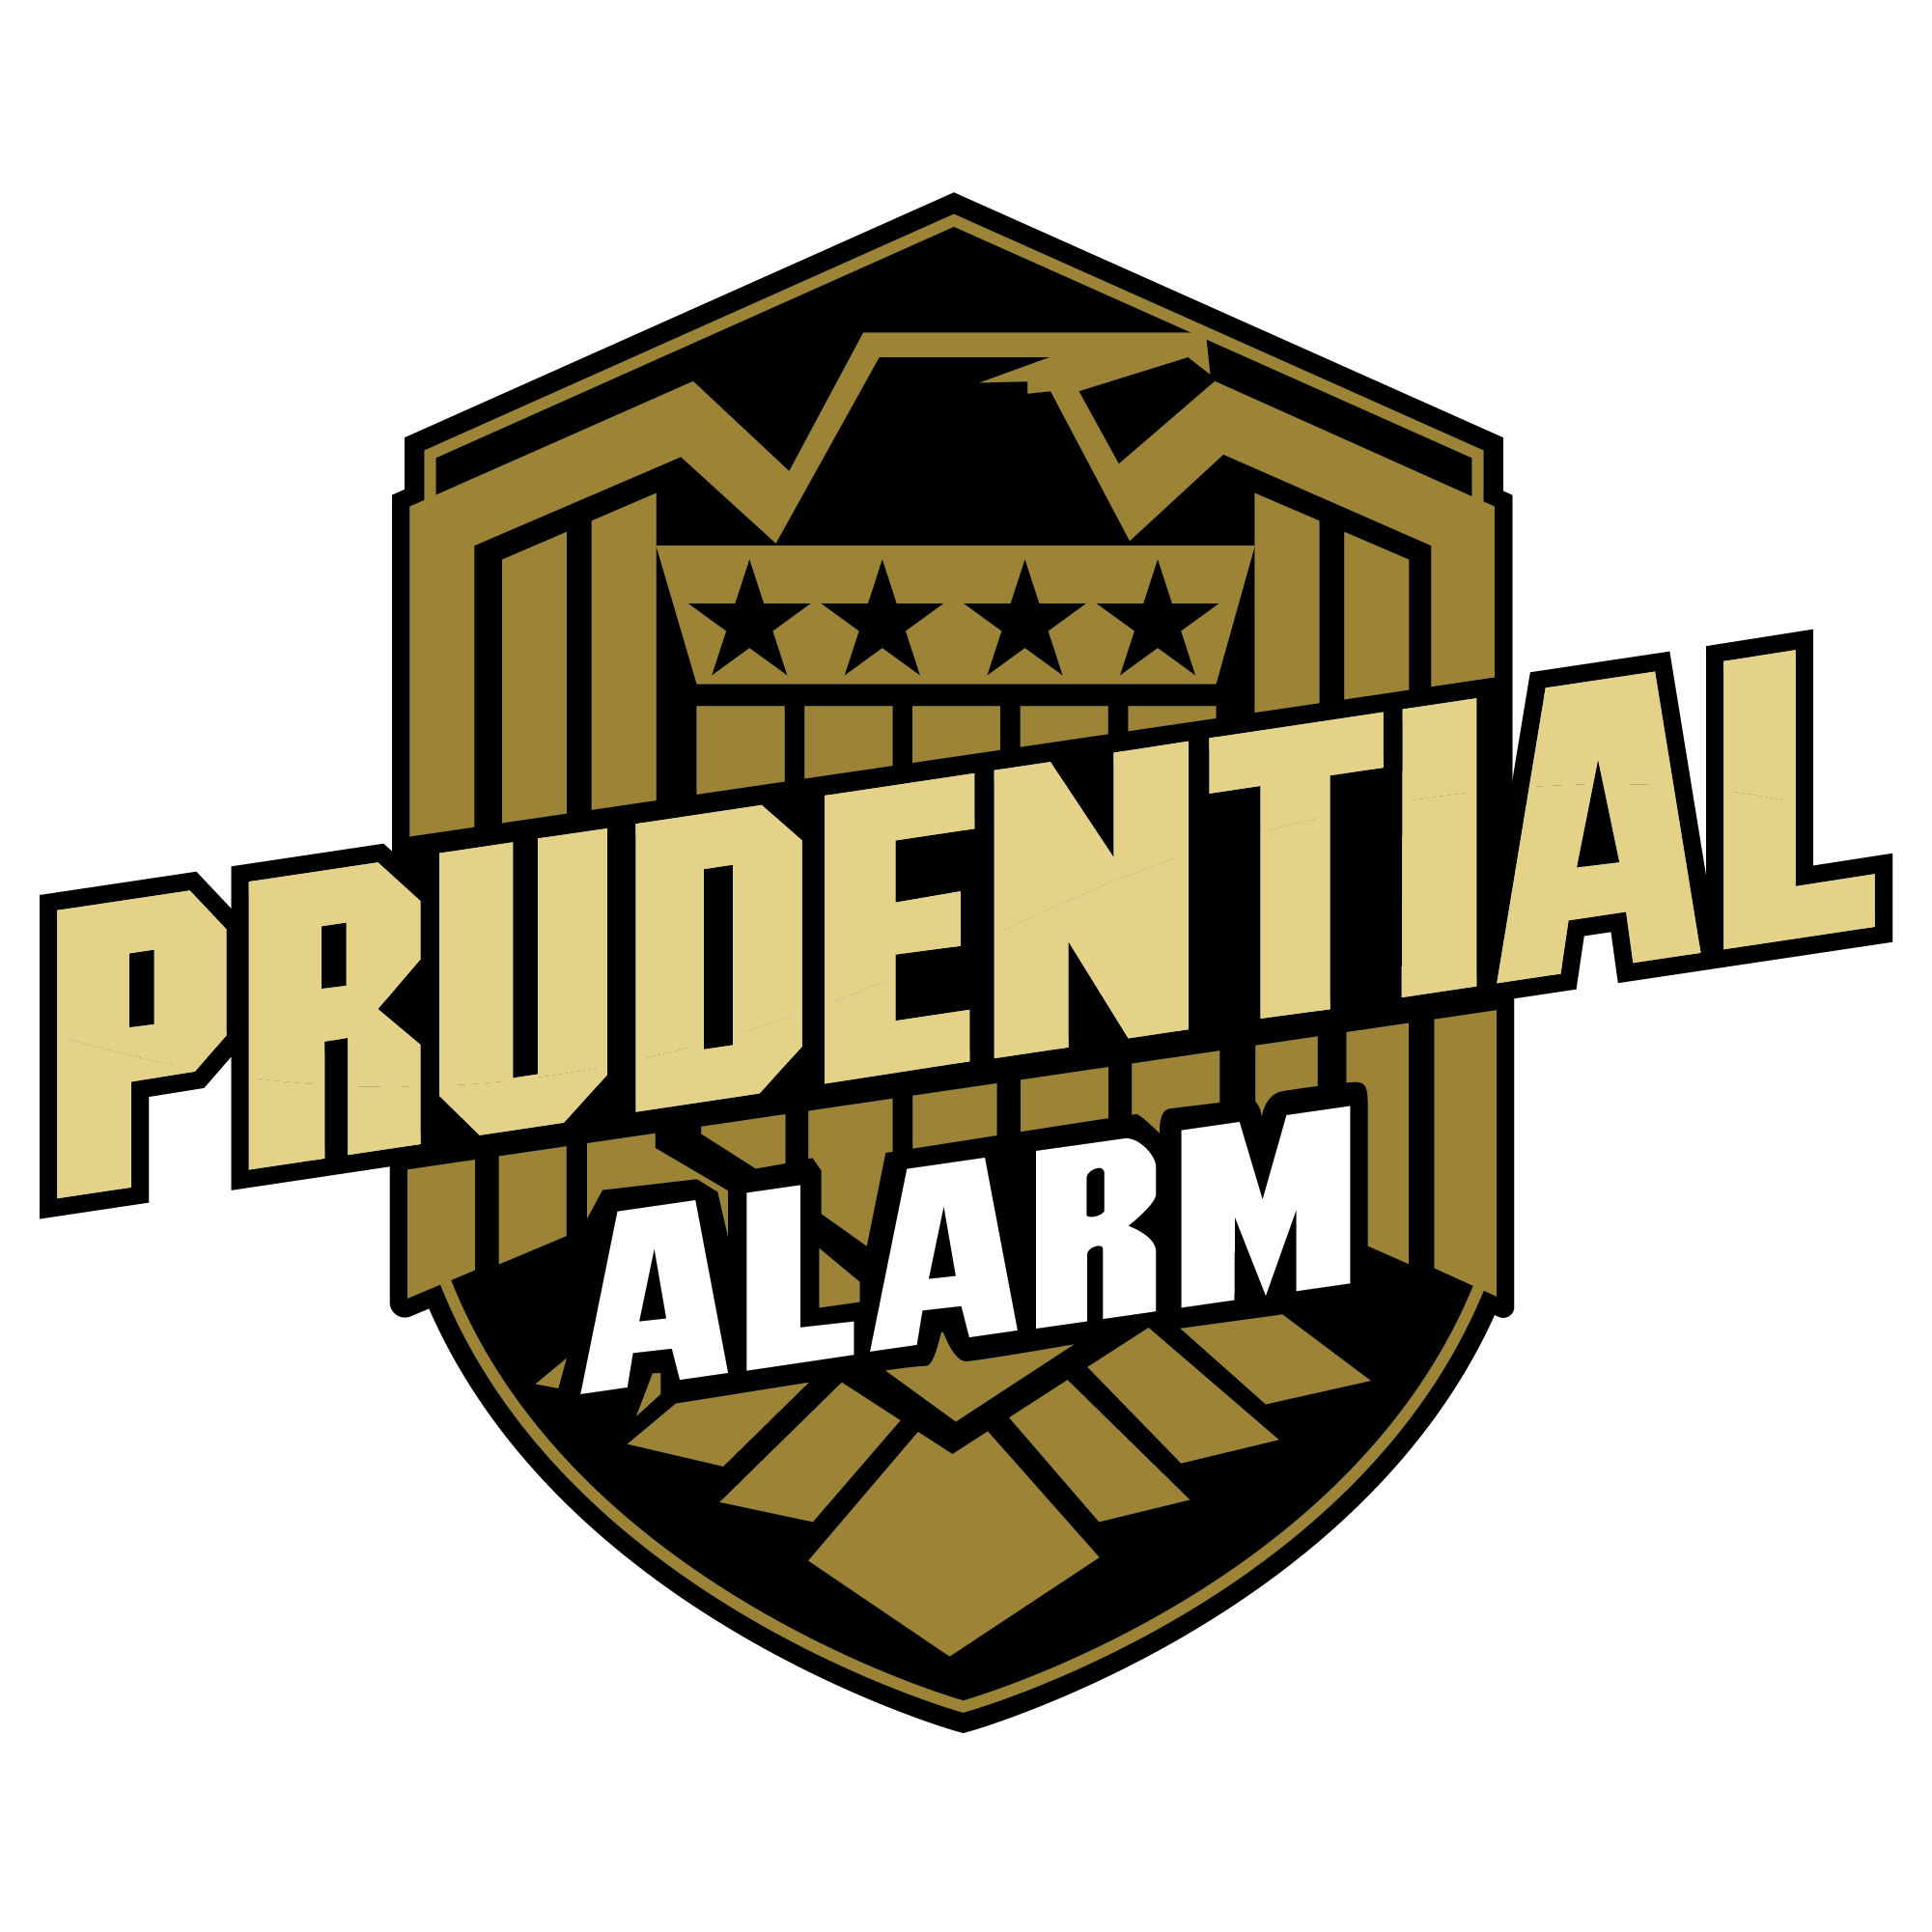 Acquisition Expands Prudential Alarm Service Footprint in the Great Lakes Region